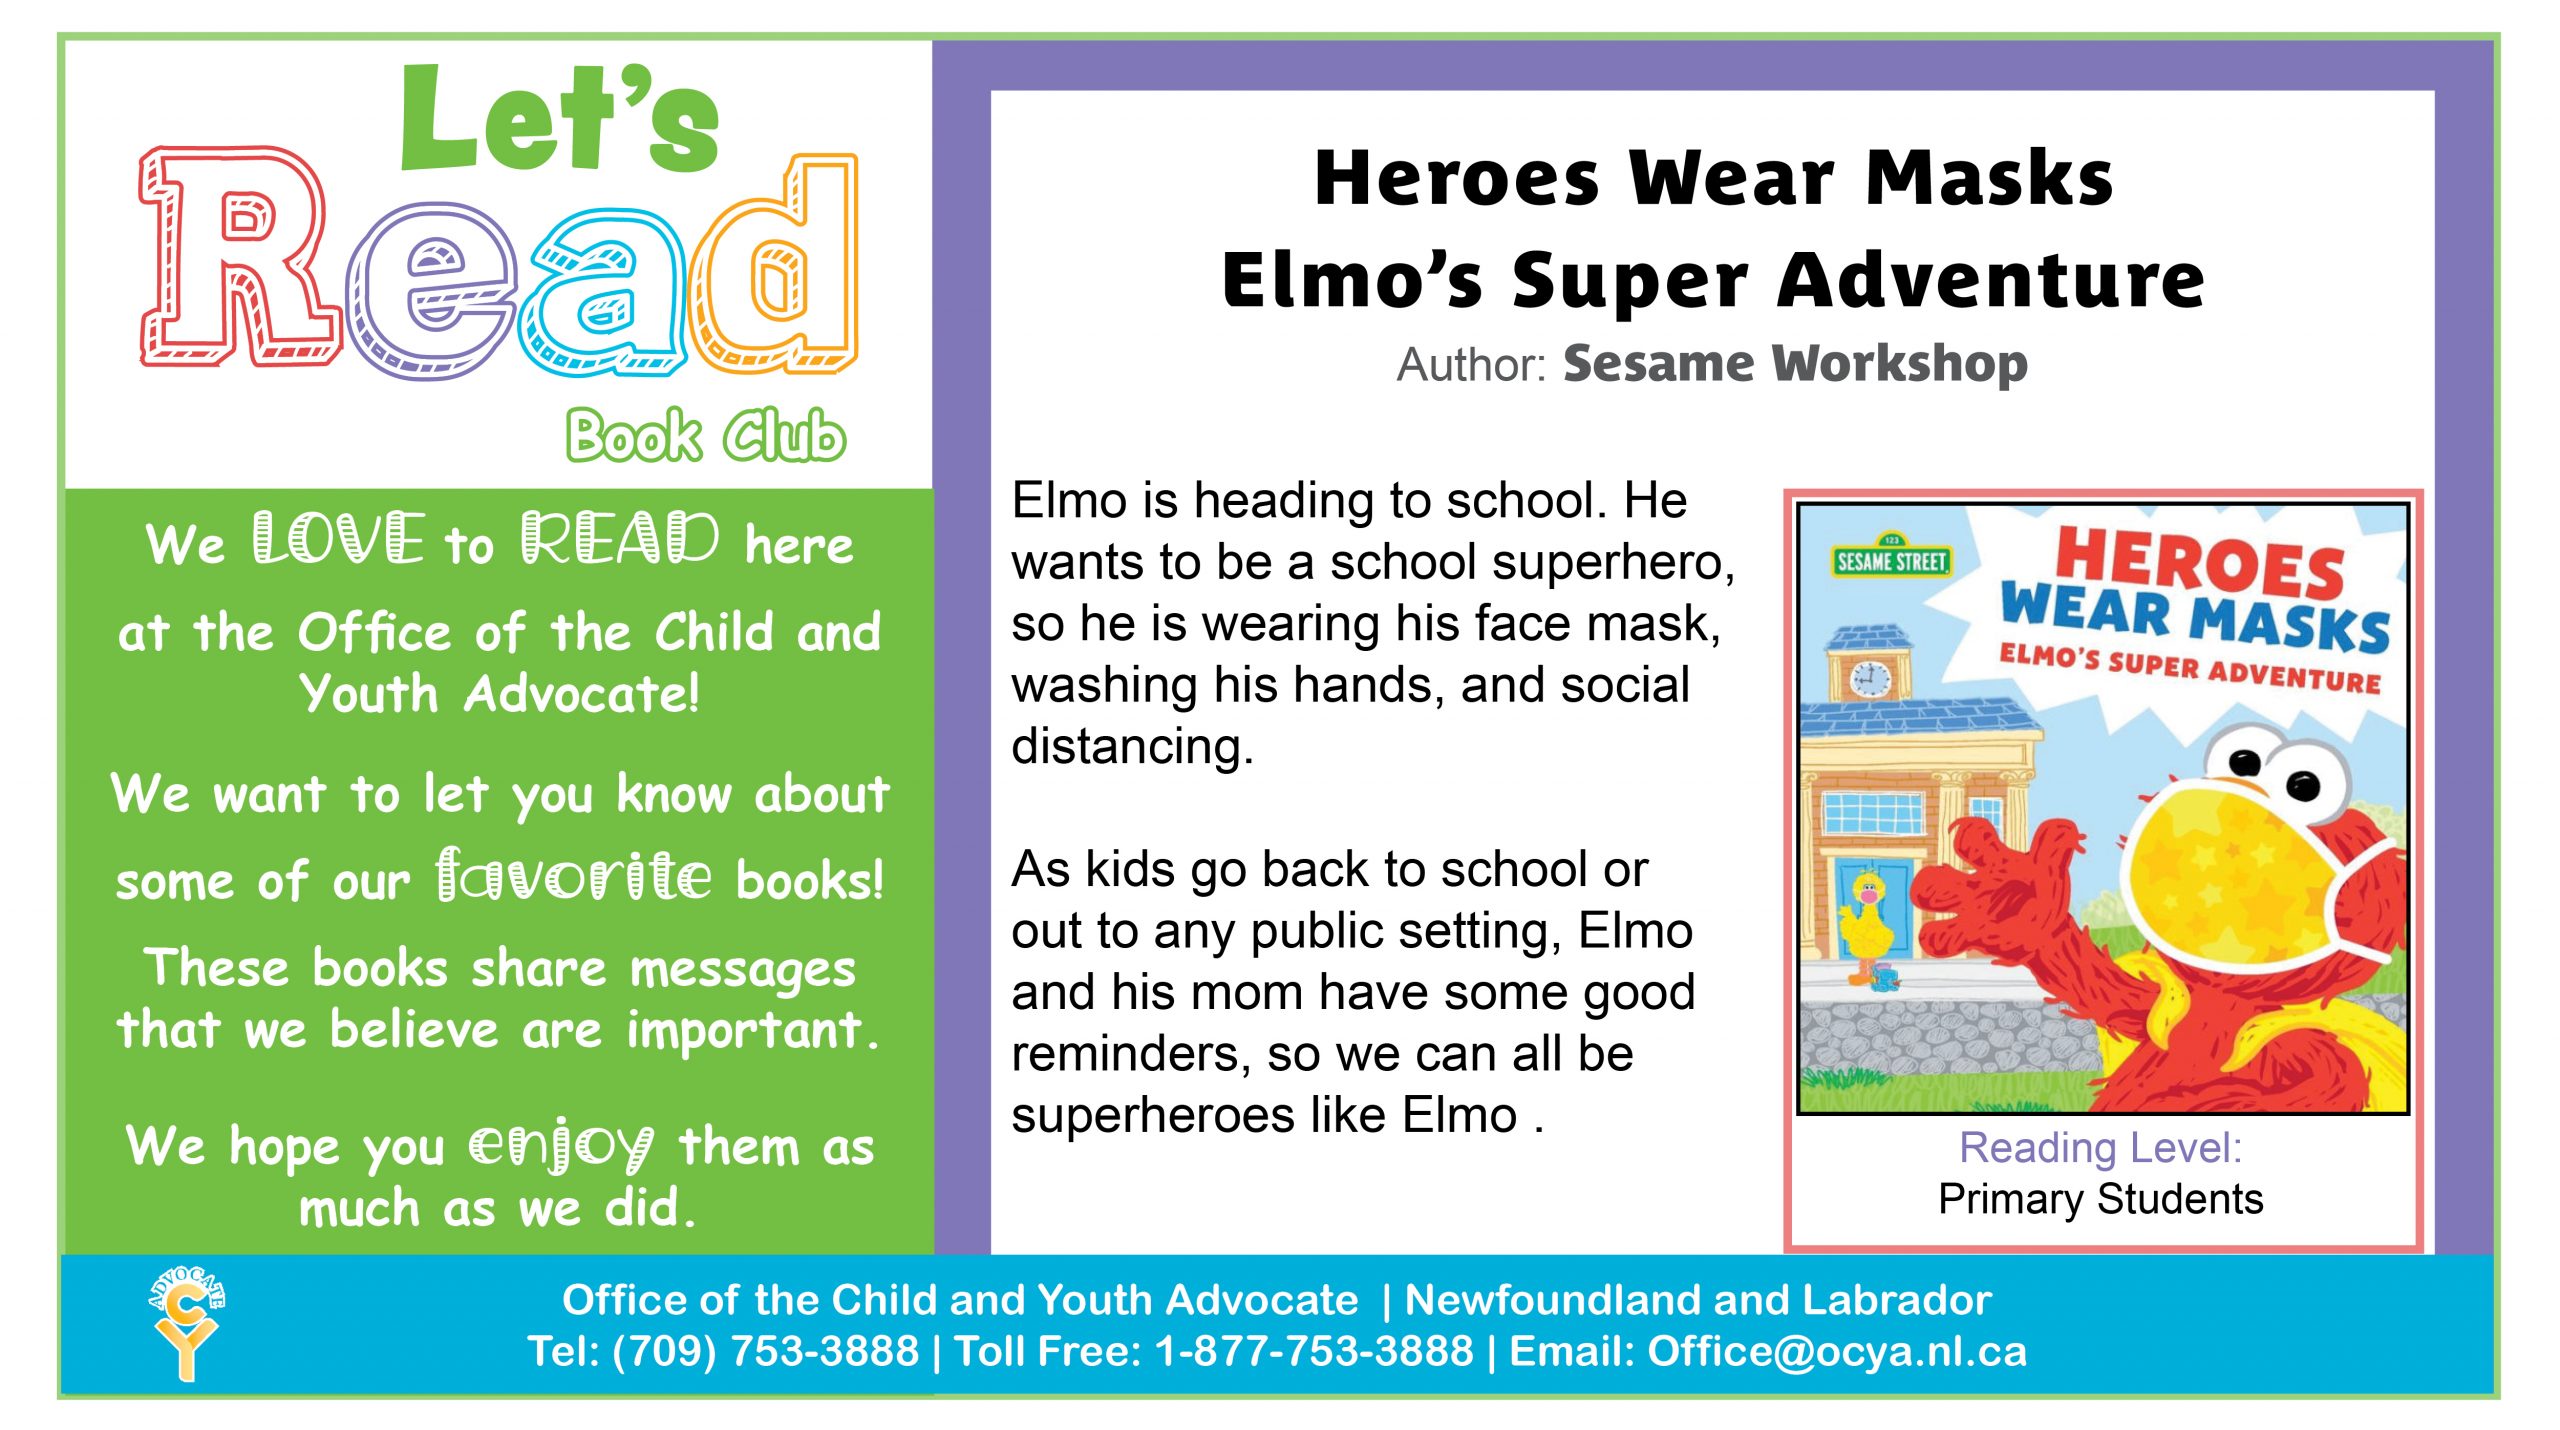 Heroes Wear Masks, by Sesame Workshop. Elmo is heading to school. He wants to be a school superhero, so he is wearing his face mask, washing his hands, and social distancing. As kids go back to school or out to any public setting, Elmo and his mom have some good reminders, so we can all be superheroes like Elmo.